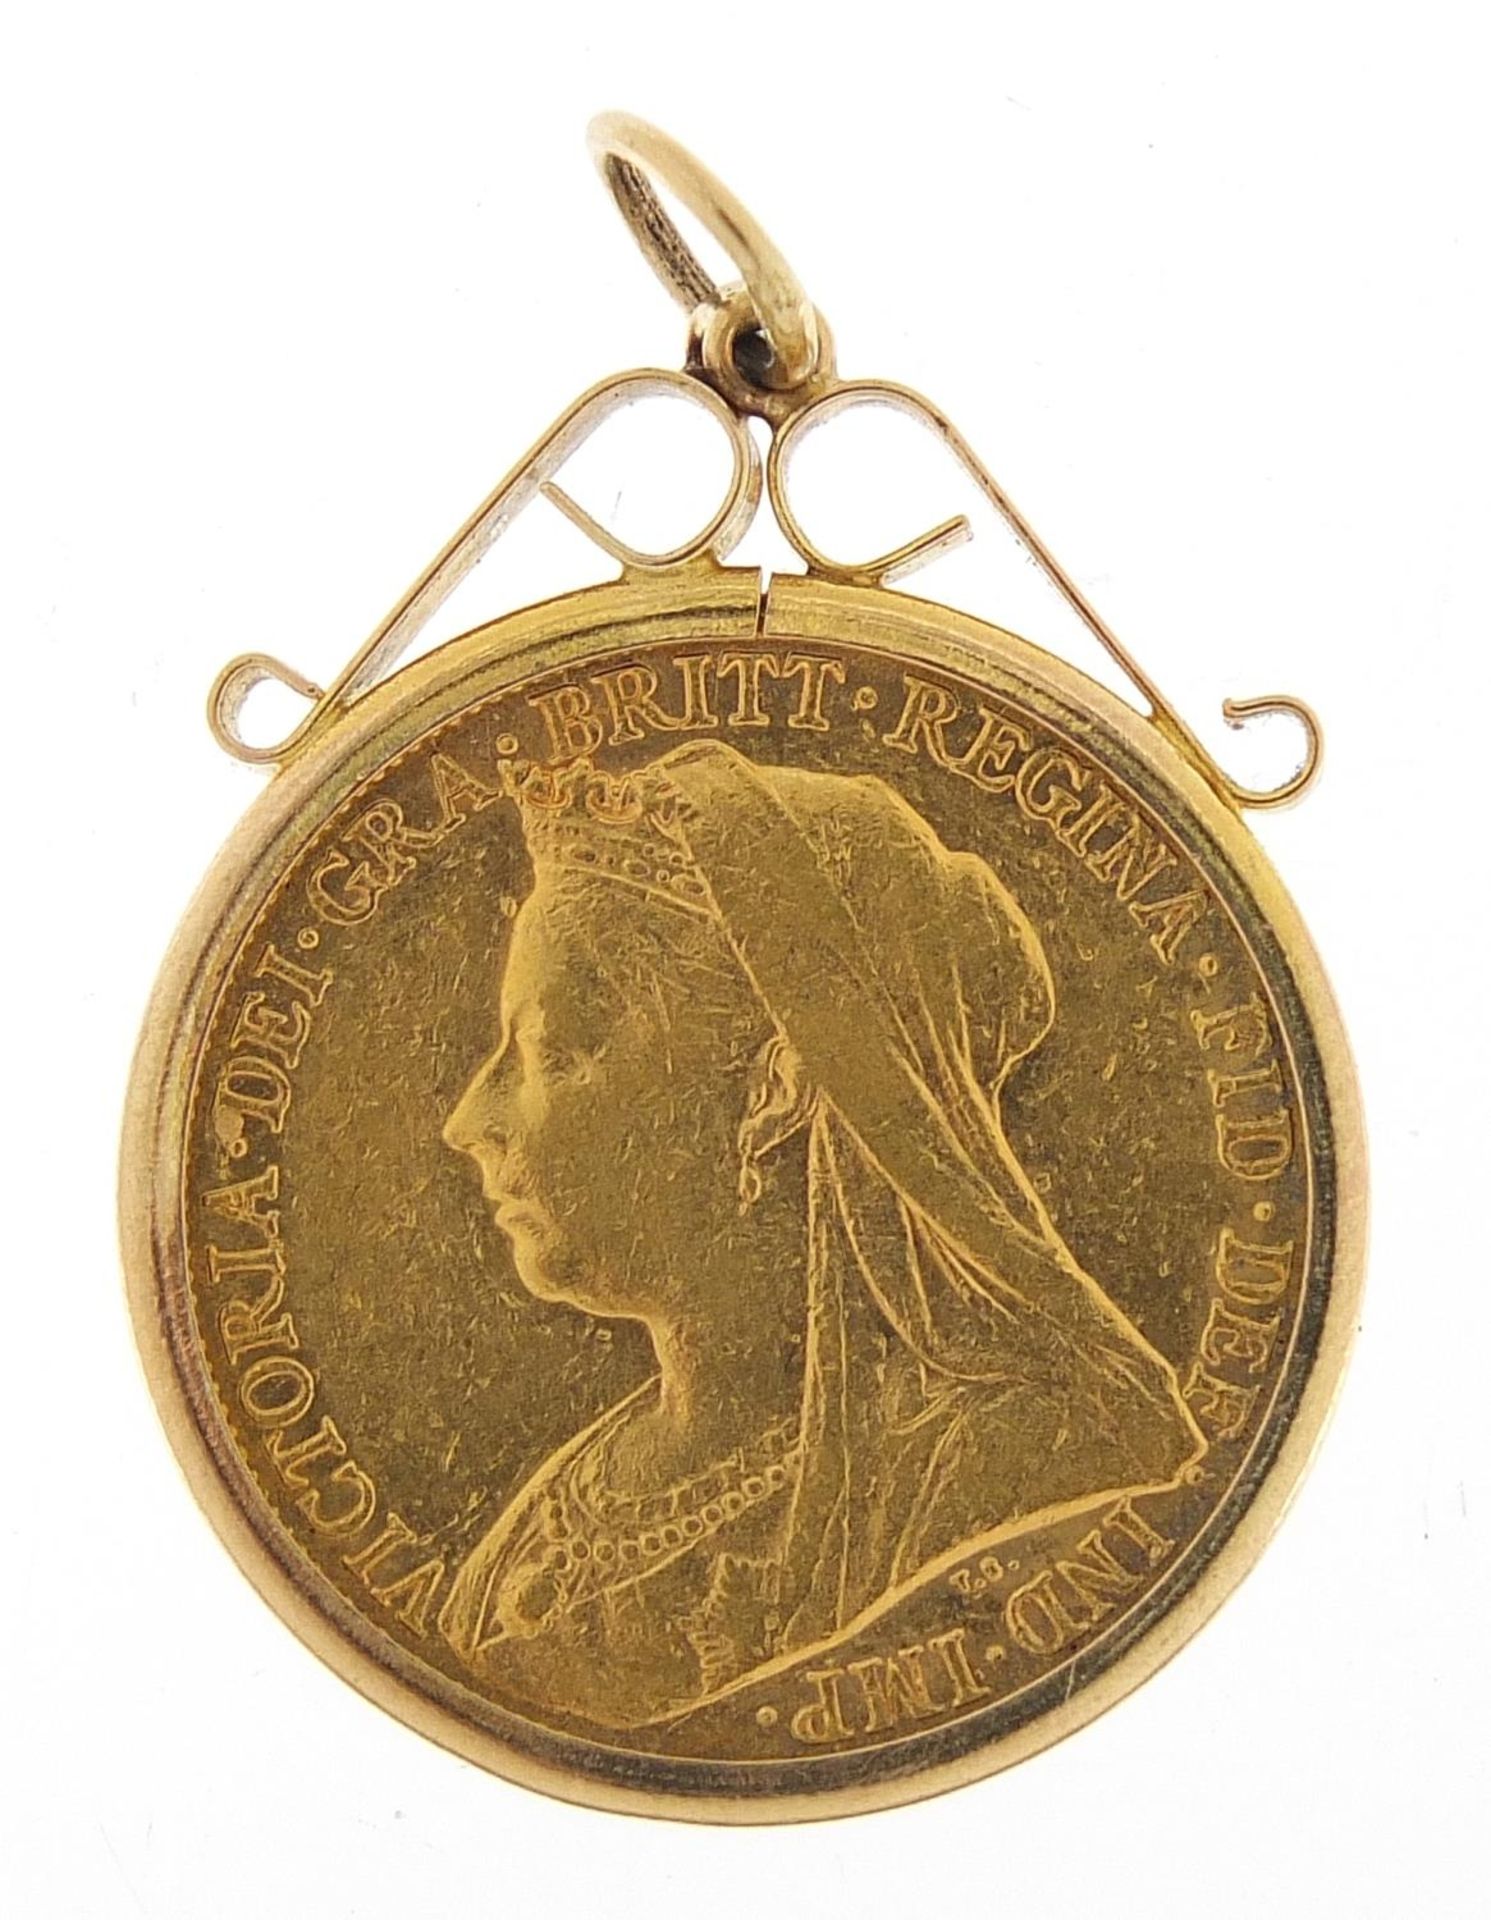 Queen Victoria 1897 gold sovereign, Melbourne mint, with 9ct gold pendant mount, 9.4g - this lot - Image 2 of 3